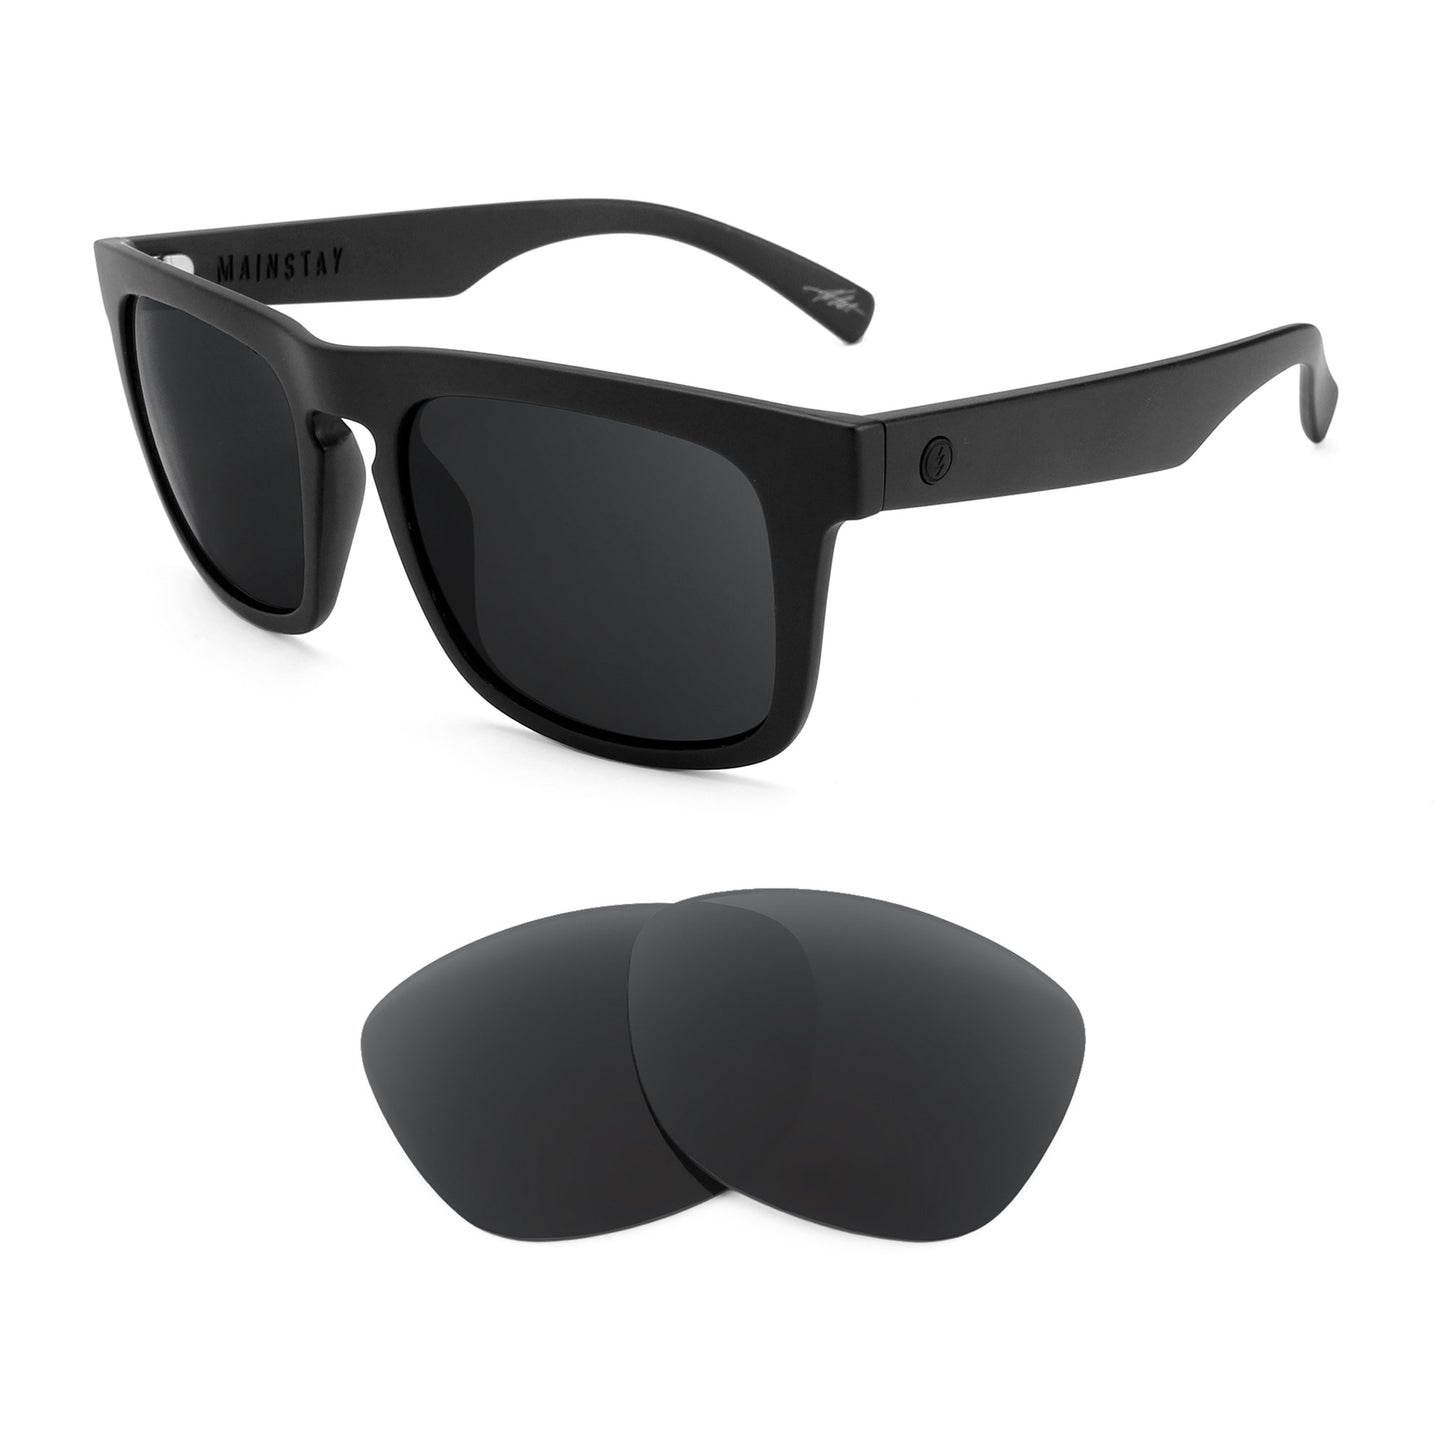 Electric Mainstay sunglasses with replacement lenses